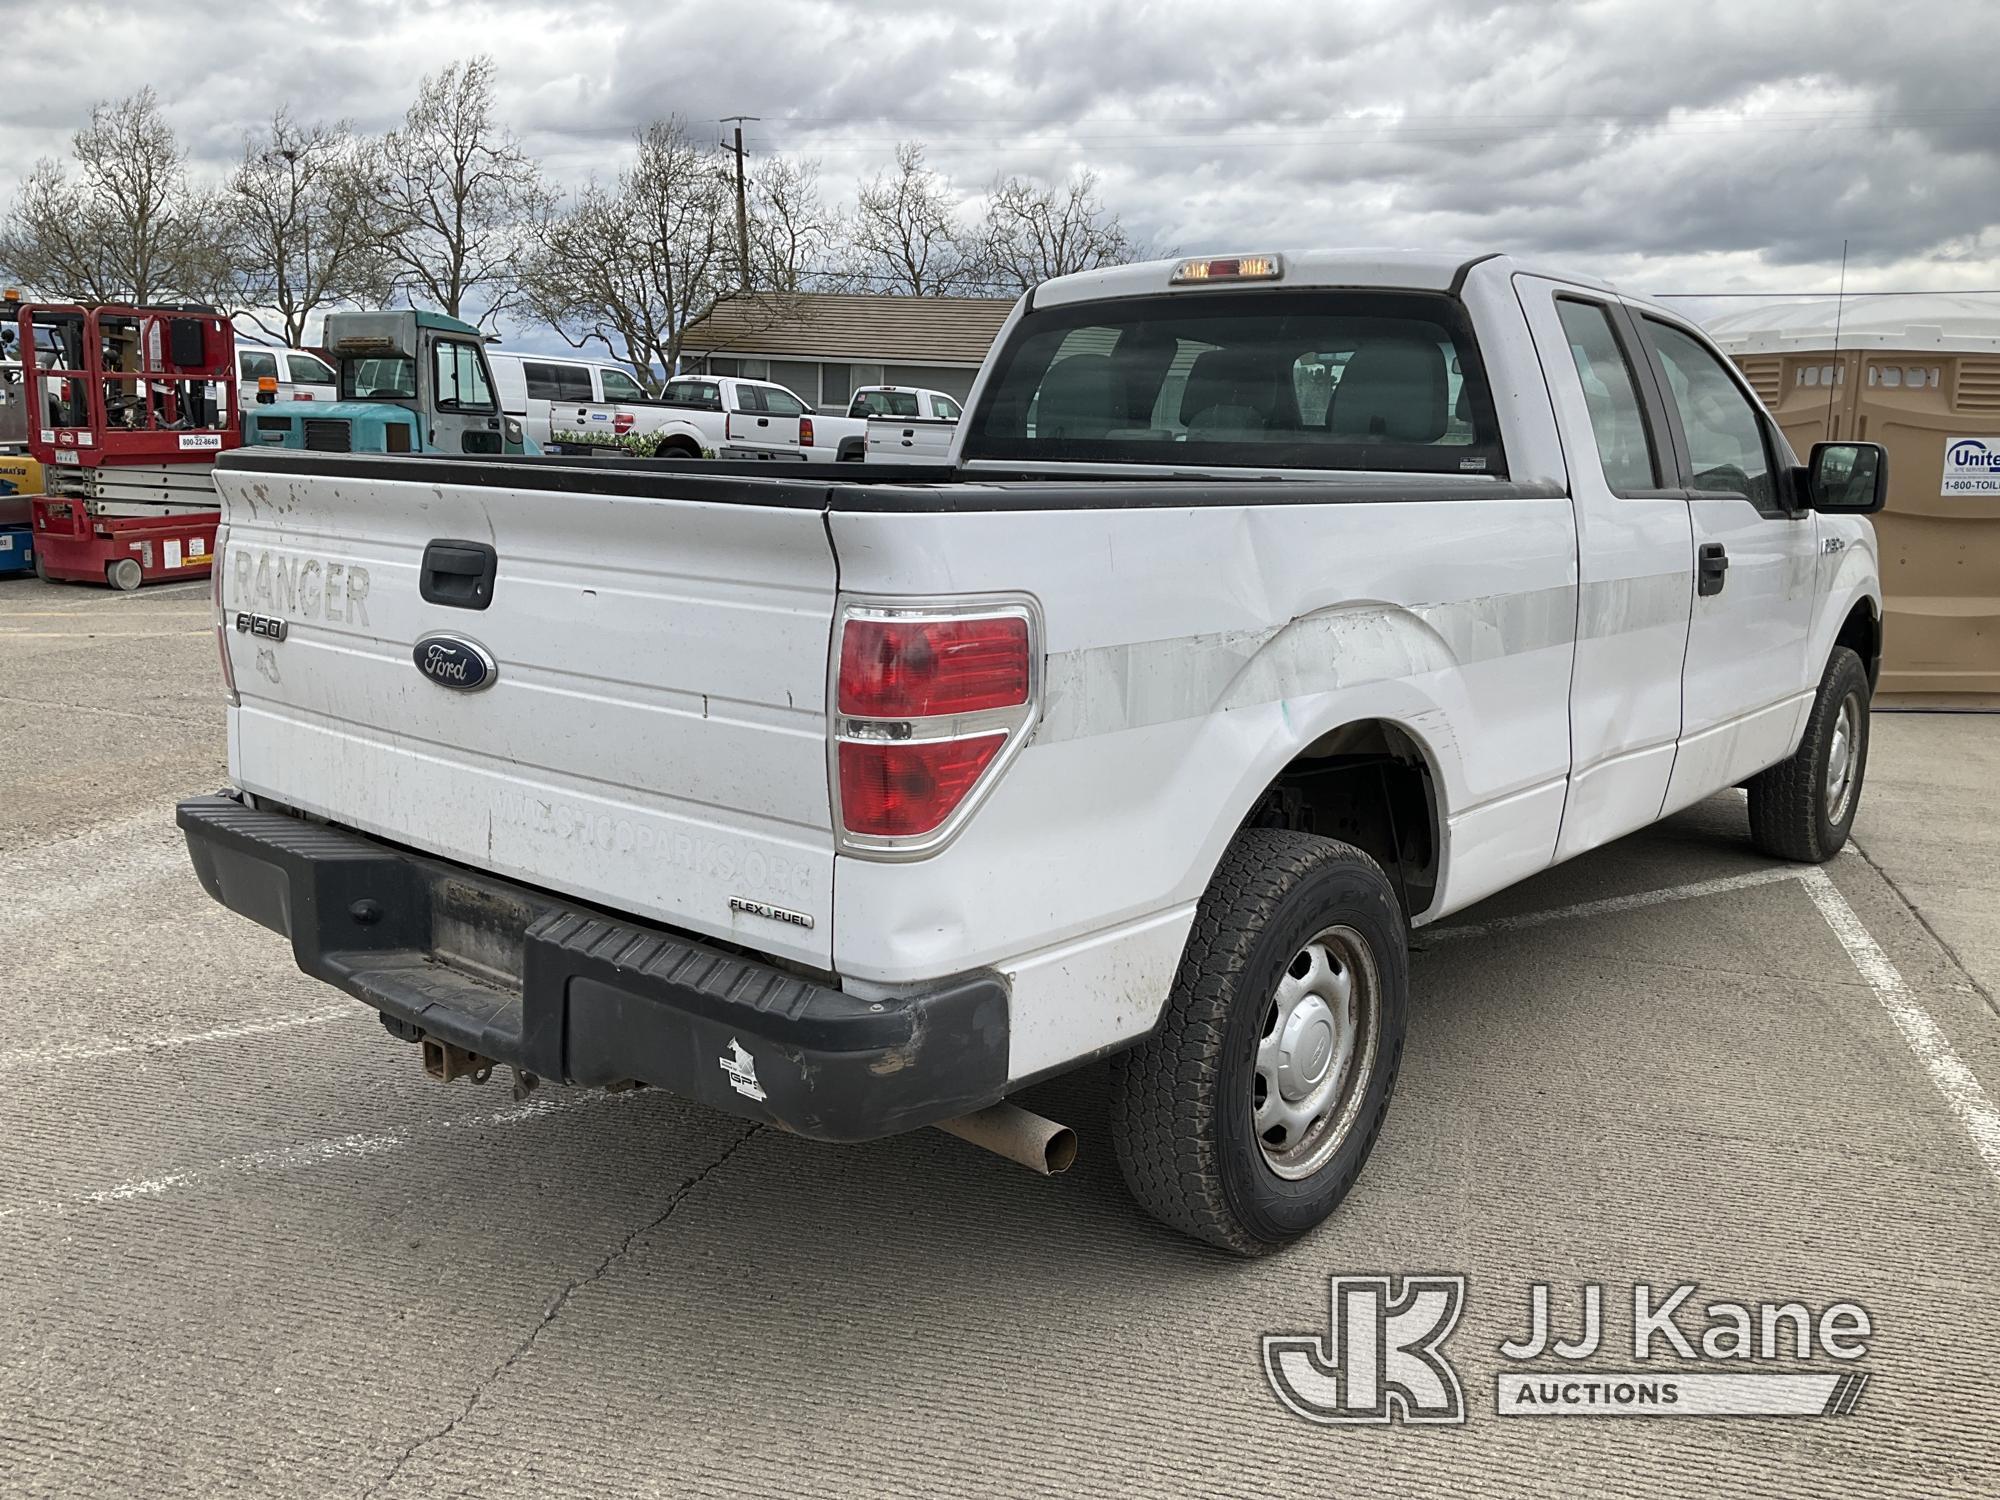 (Dixon, CA) 2014 Ford F150 4x4 Lariat Extended-Cab Pickup Truck Runs & Moves) (Engine Light On.